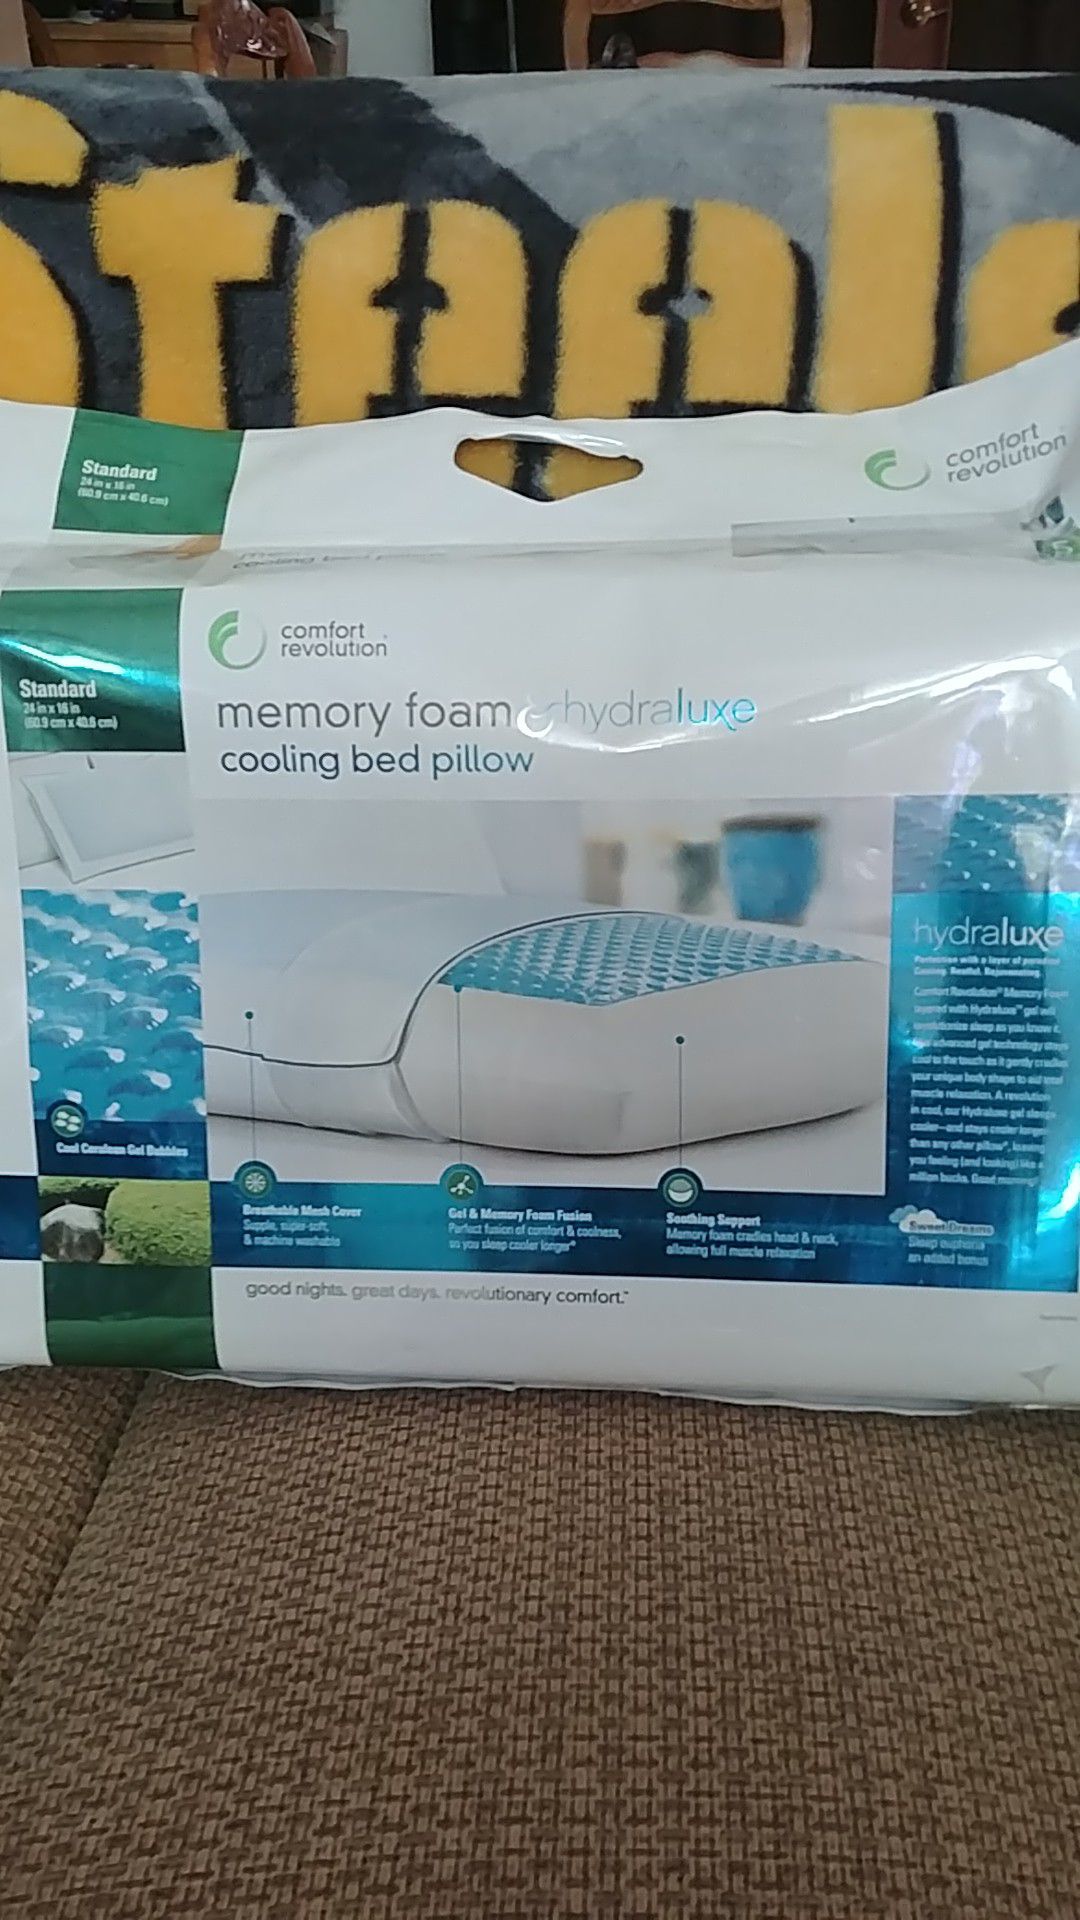 Comfert Revolution Memory Foam Hydralux cooling bed pillow